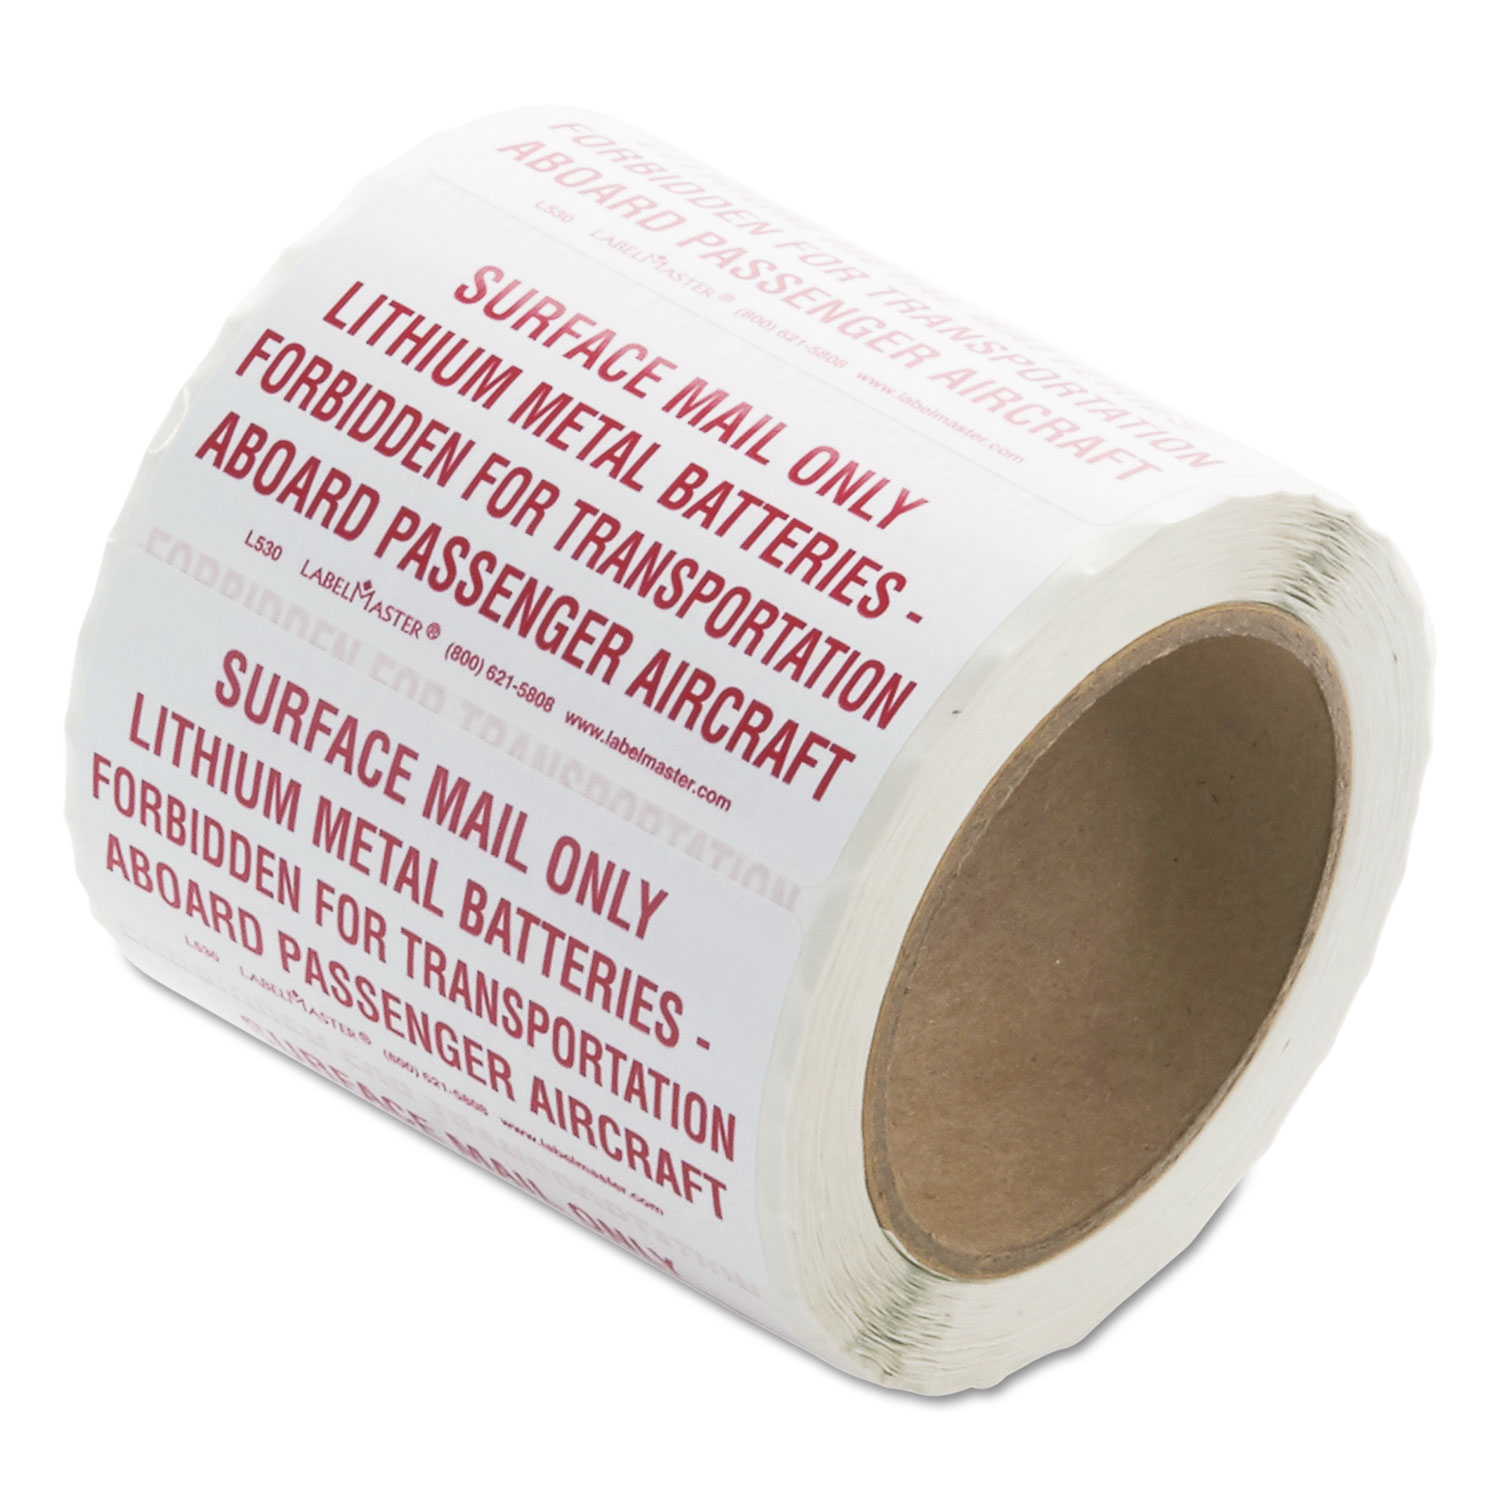 Lithium Battery Self-Adhesive Label, 4 x 2, FORBIDDEN, 500/Roll